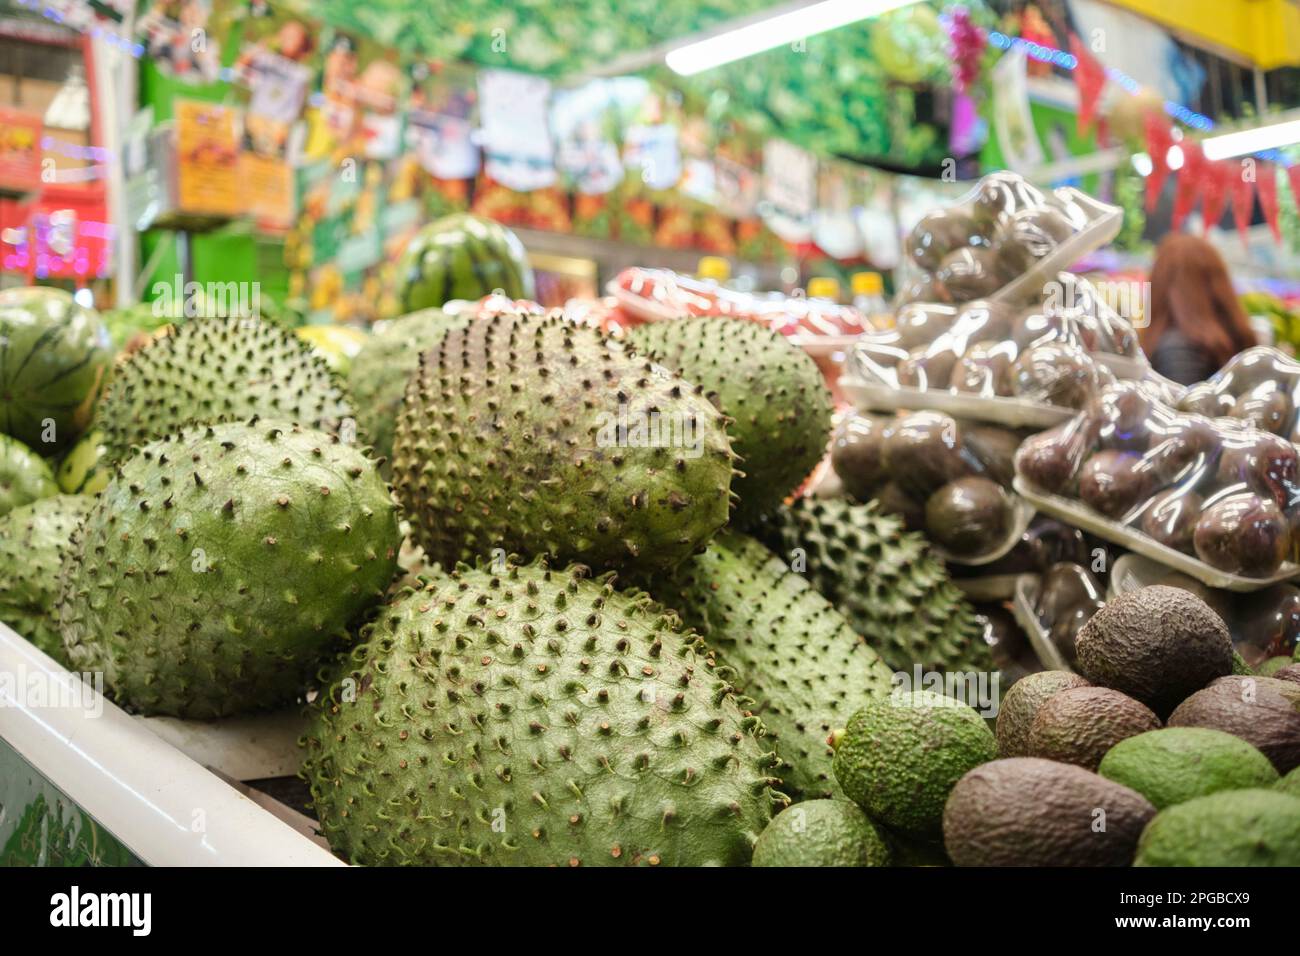 Soursop or graviola fruits for sale at the vegetable market stall. Stock Photo